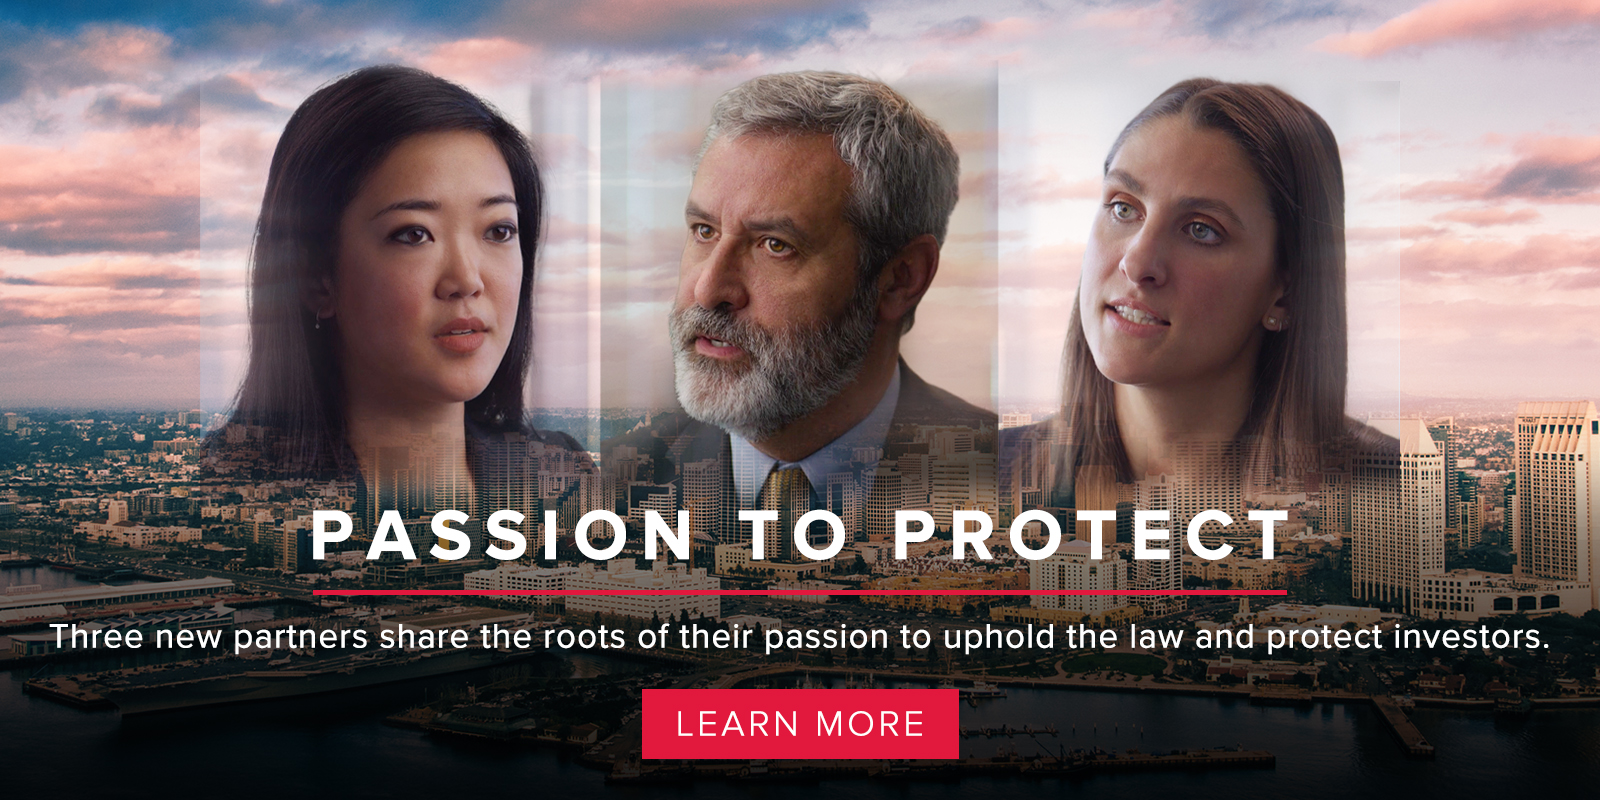 Three new partners share the roots of their passion to uphold laws and protect investors.